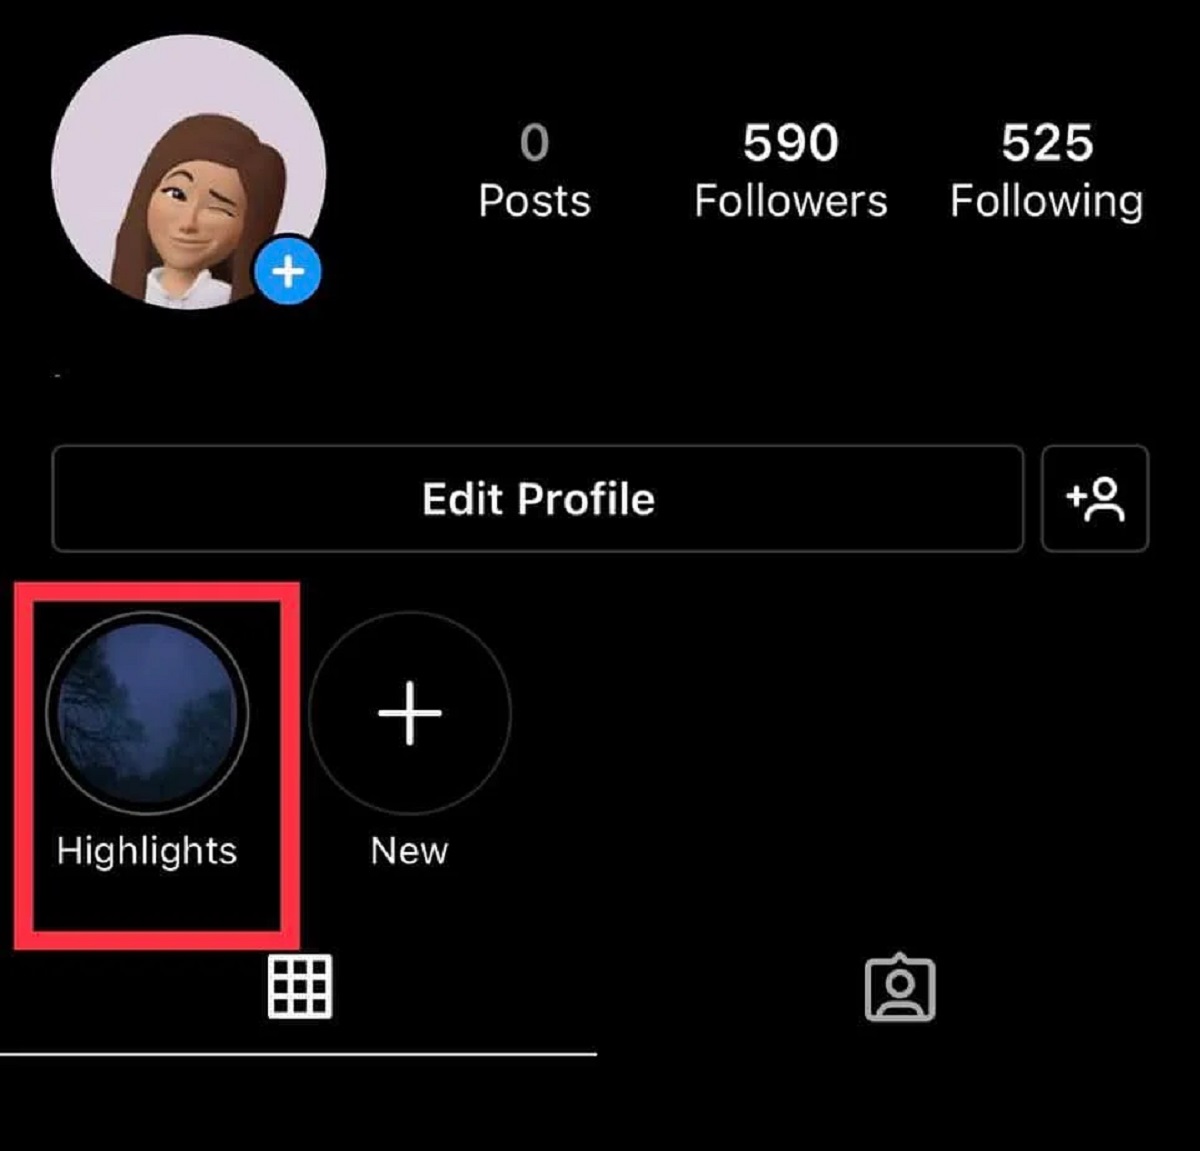 Can You See Who Views Your Highlights on Instagram